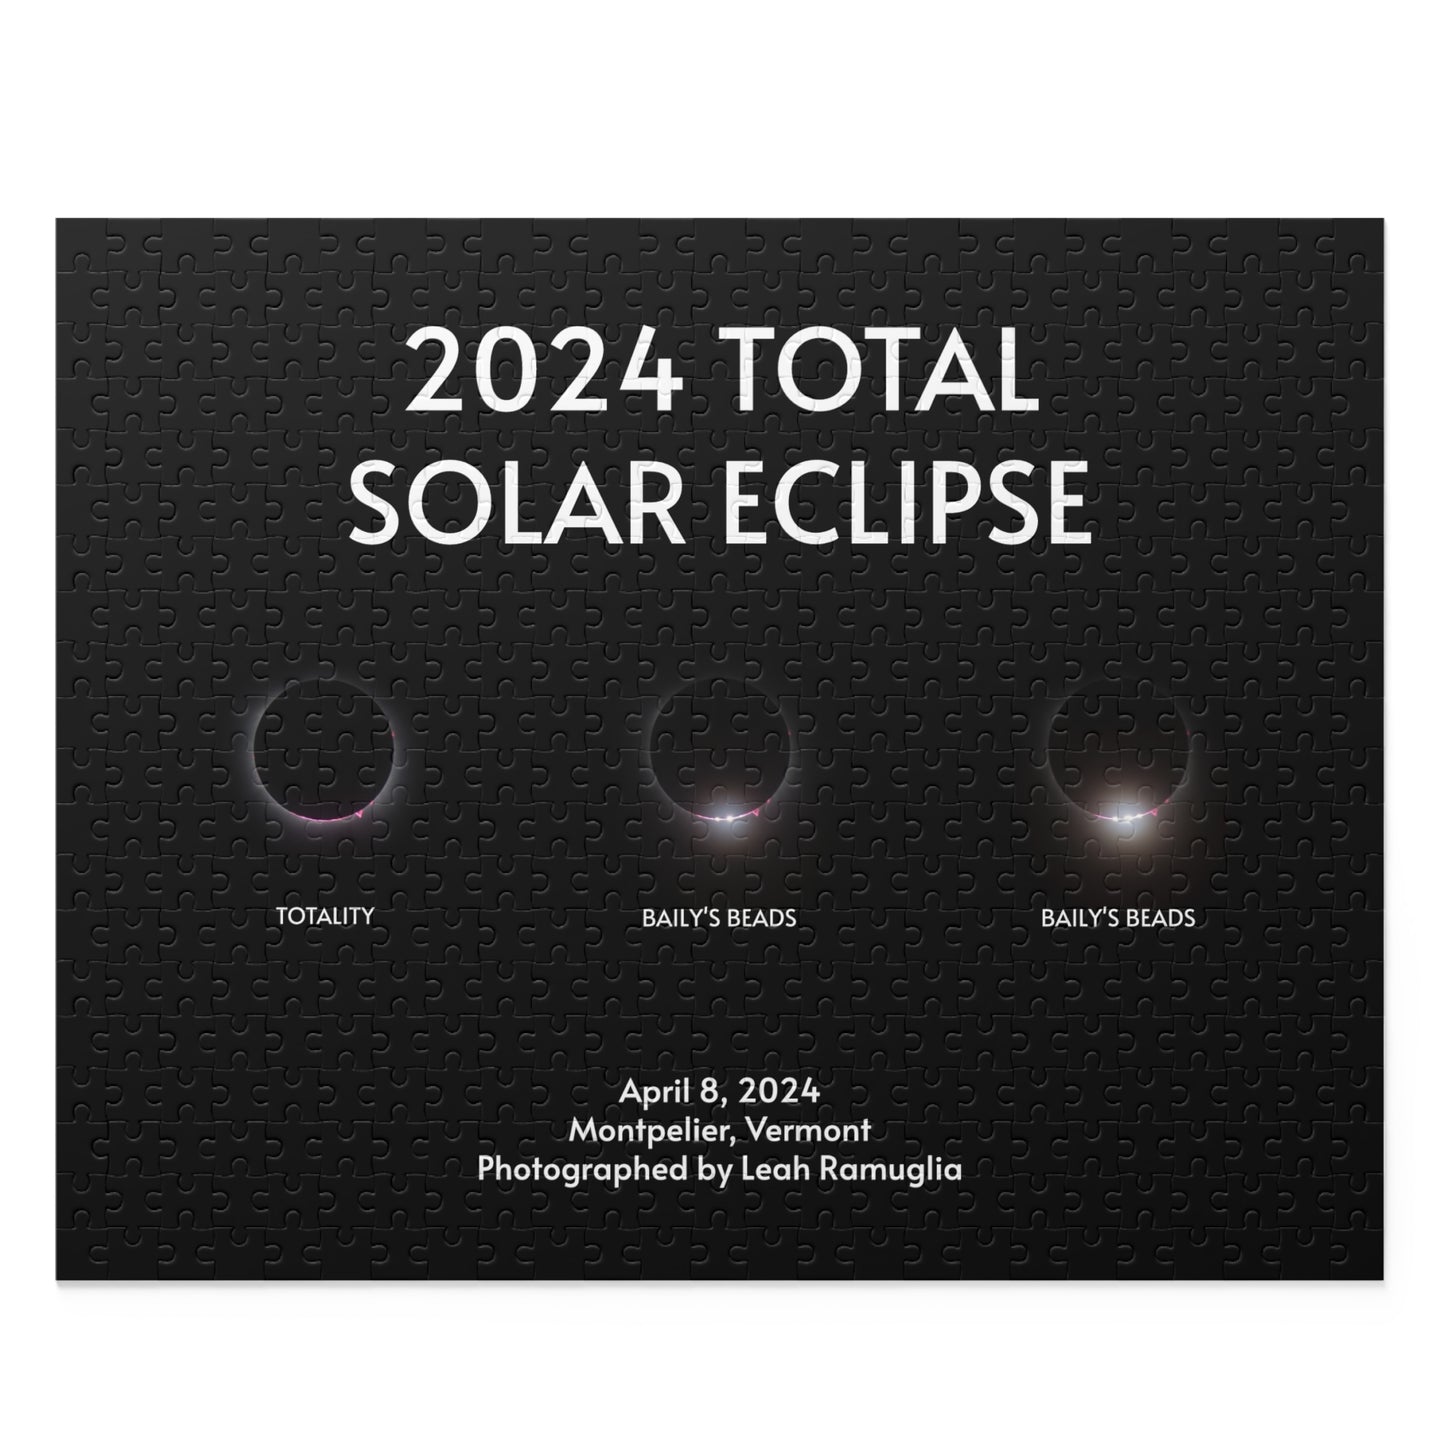 2024 Total Solar Eclipse Totality & Baily’s Beads Puzzle